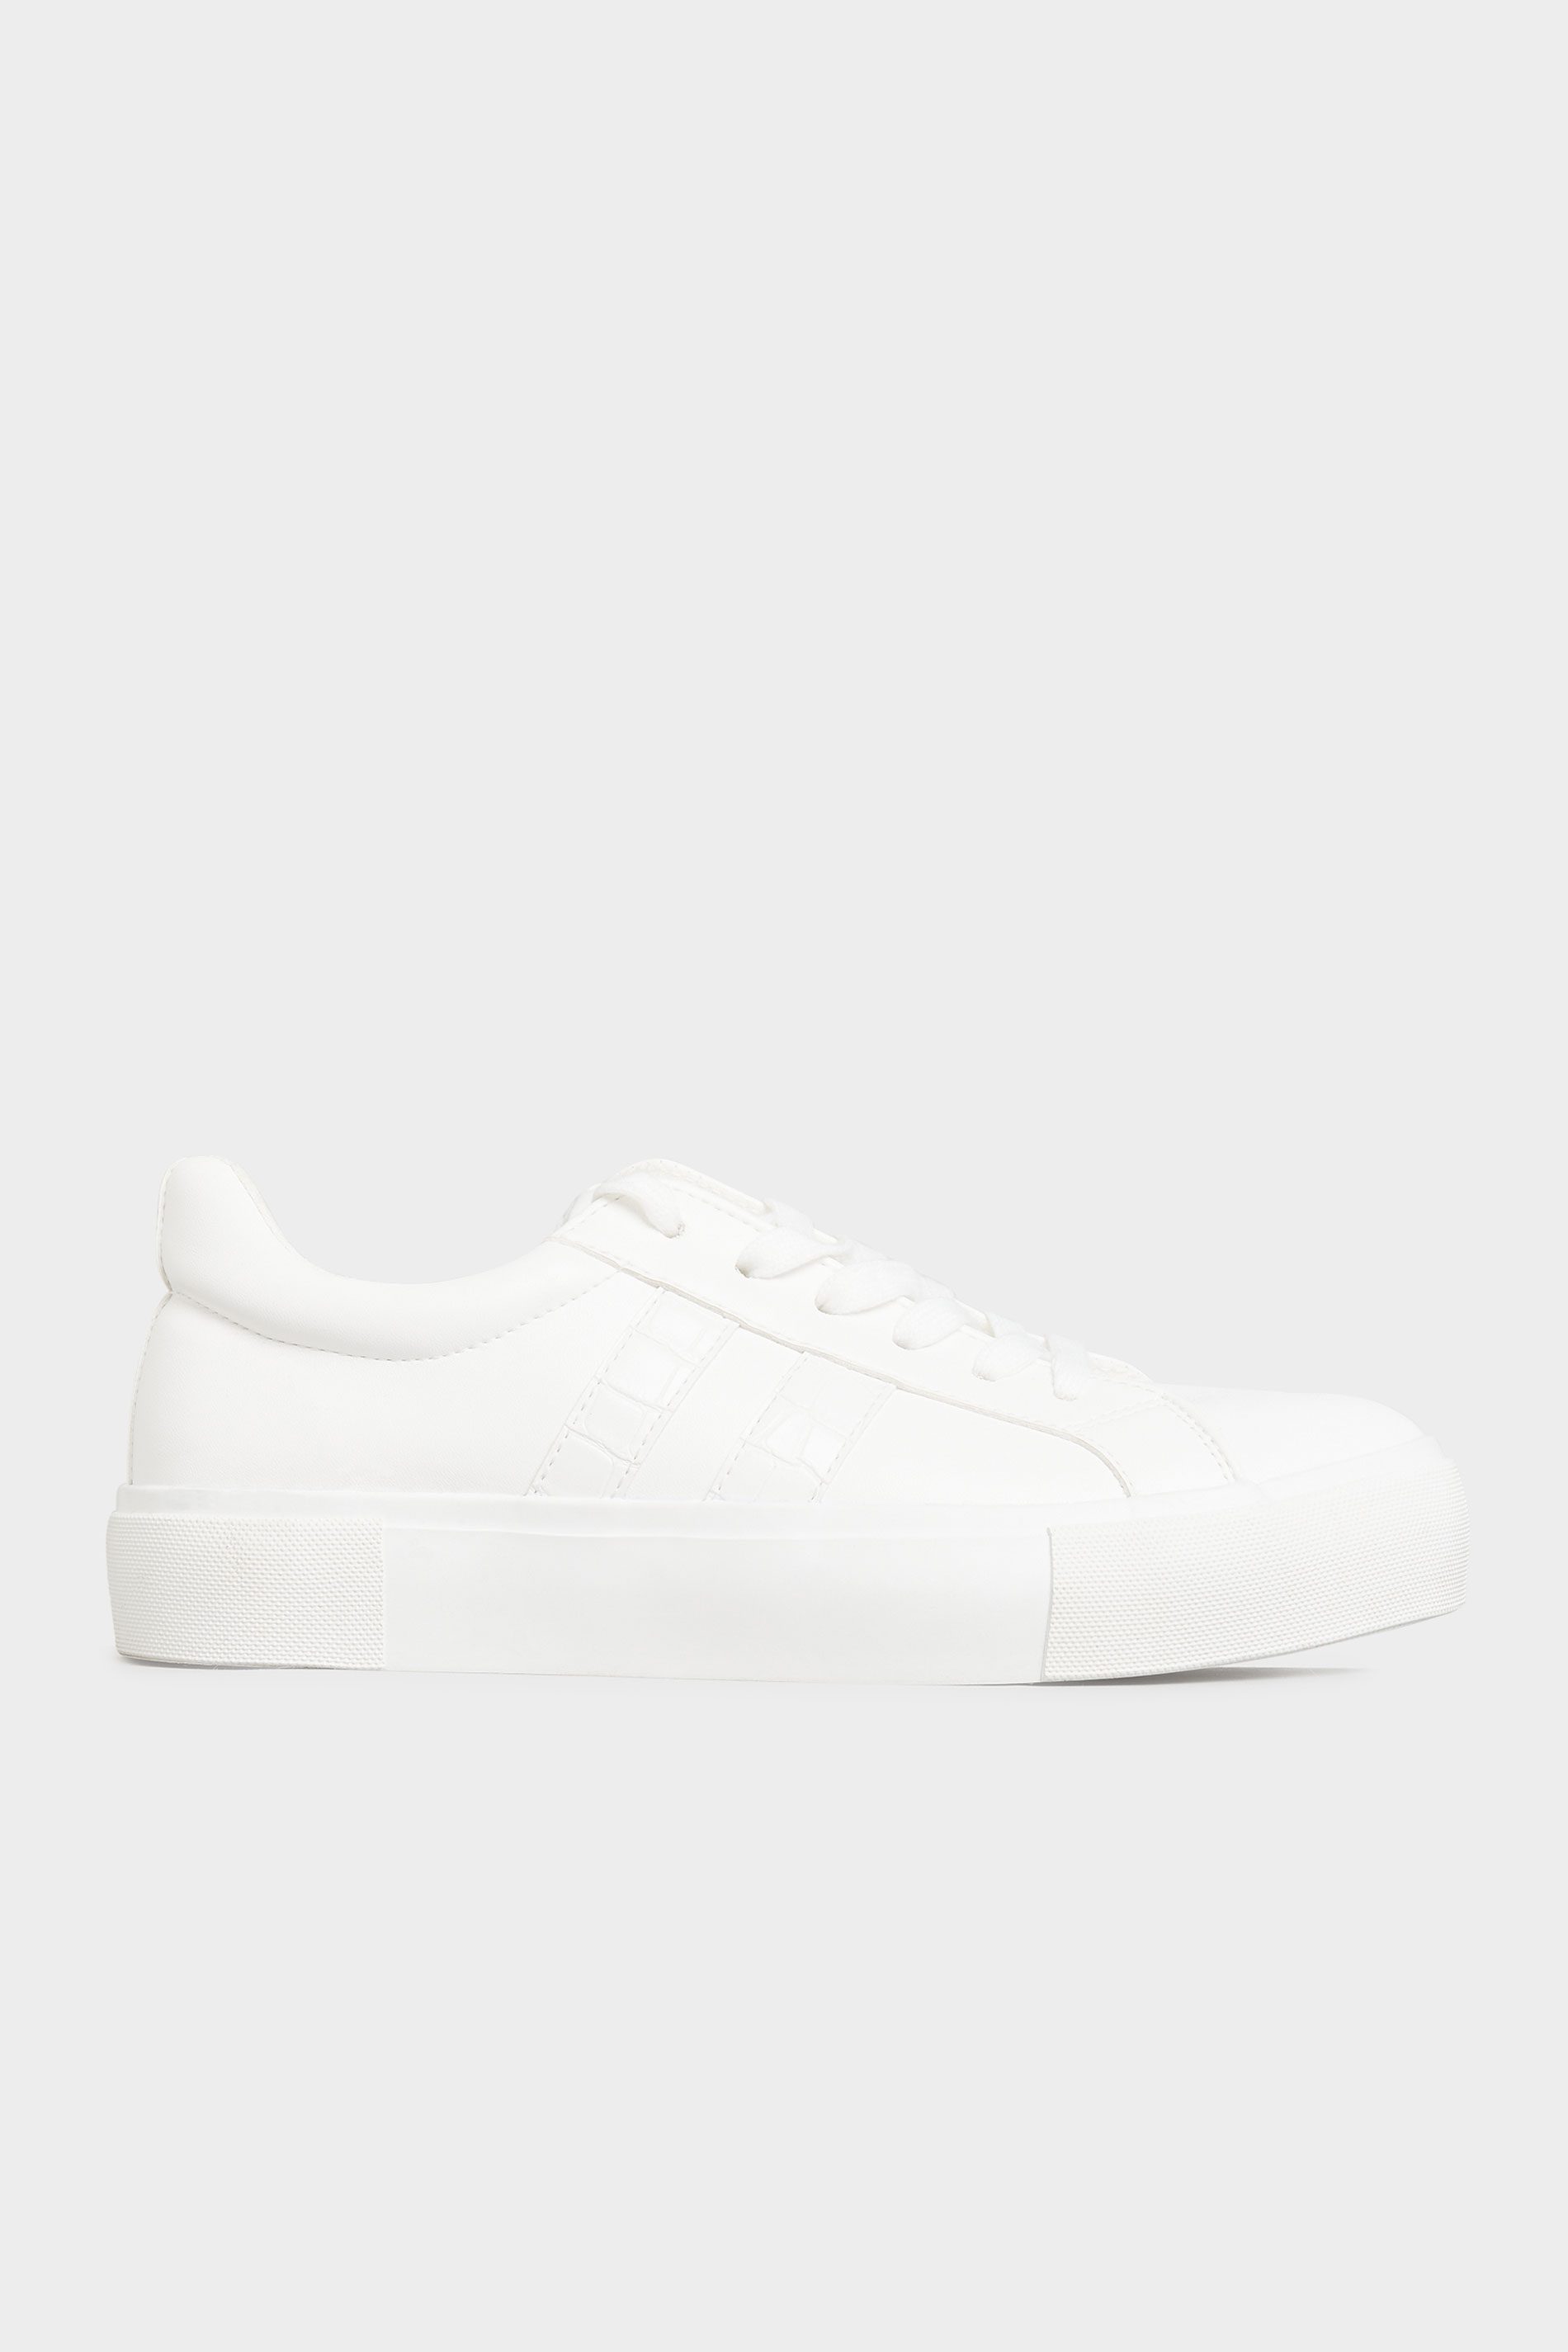 LIMITED COLLECTION White Platform Stripe Trainers In Wide Fit | Yours ...